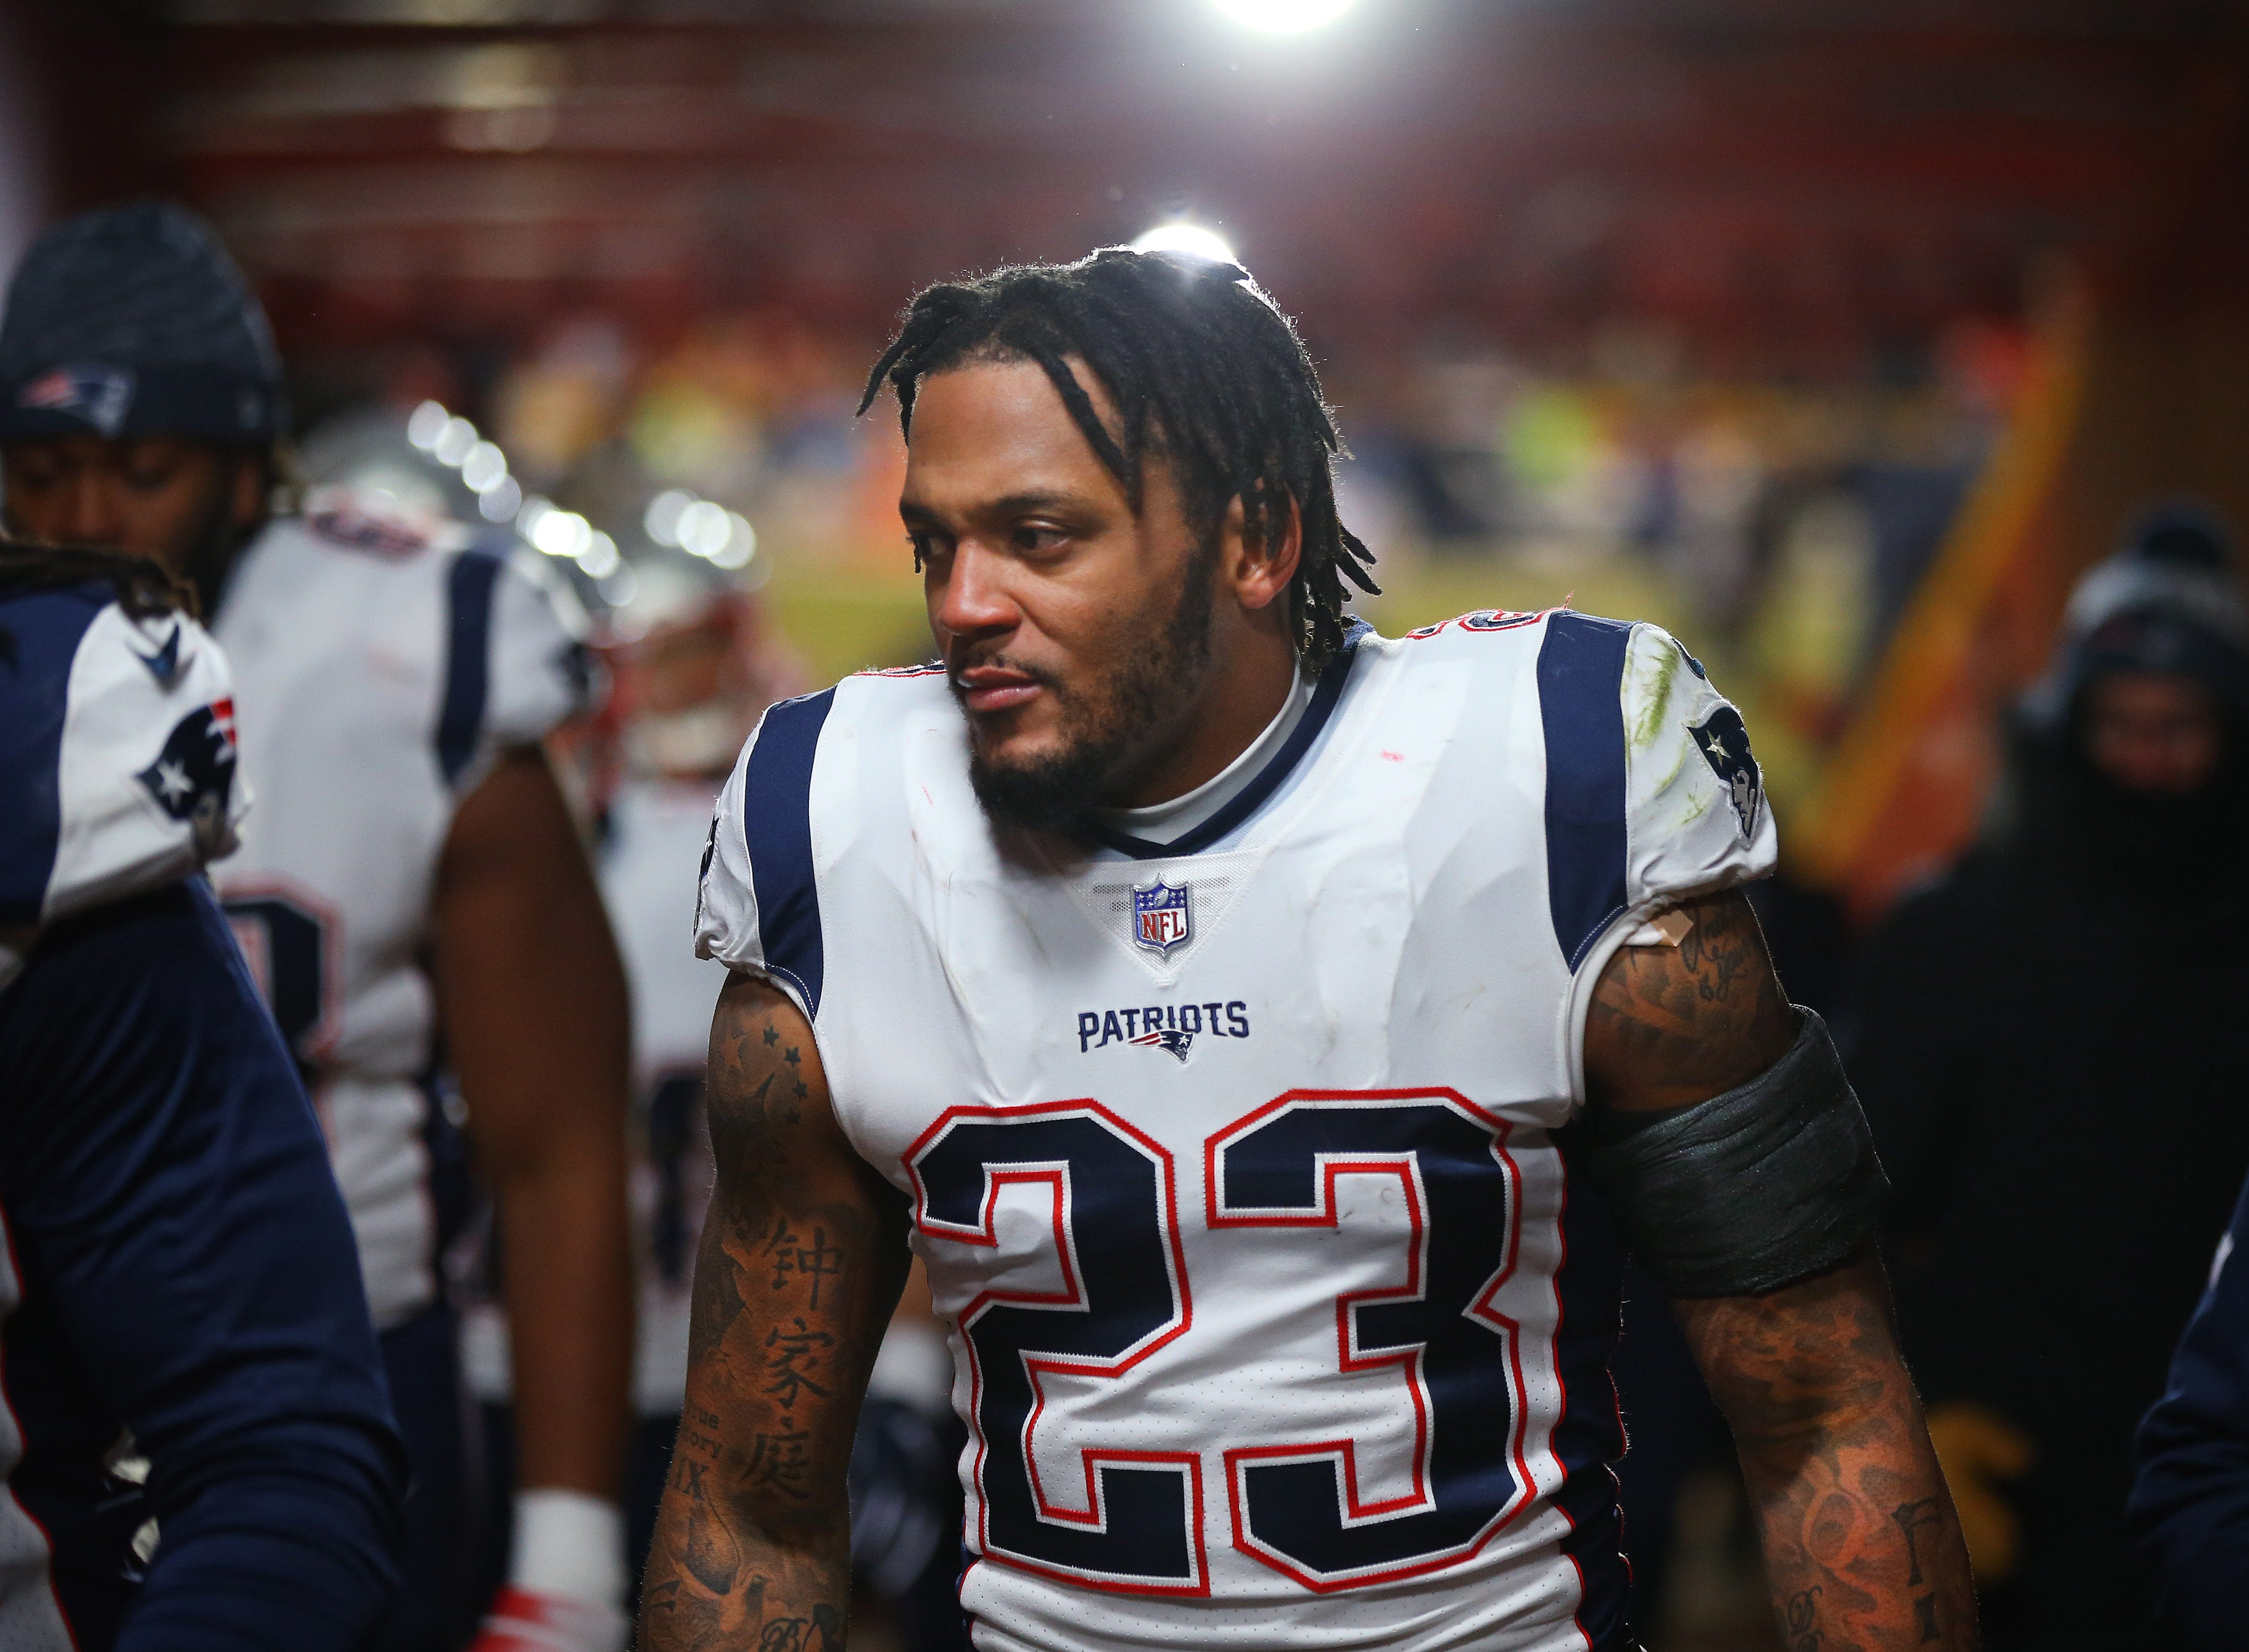 New England Patriots: Patrick Chung indicted on cocaine possession